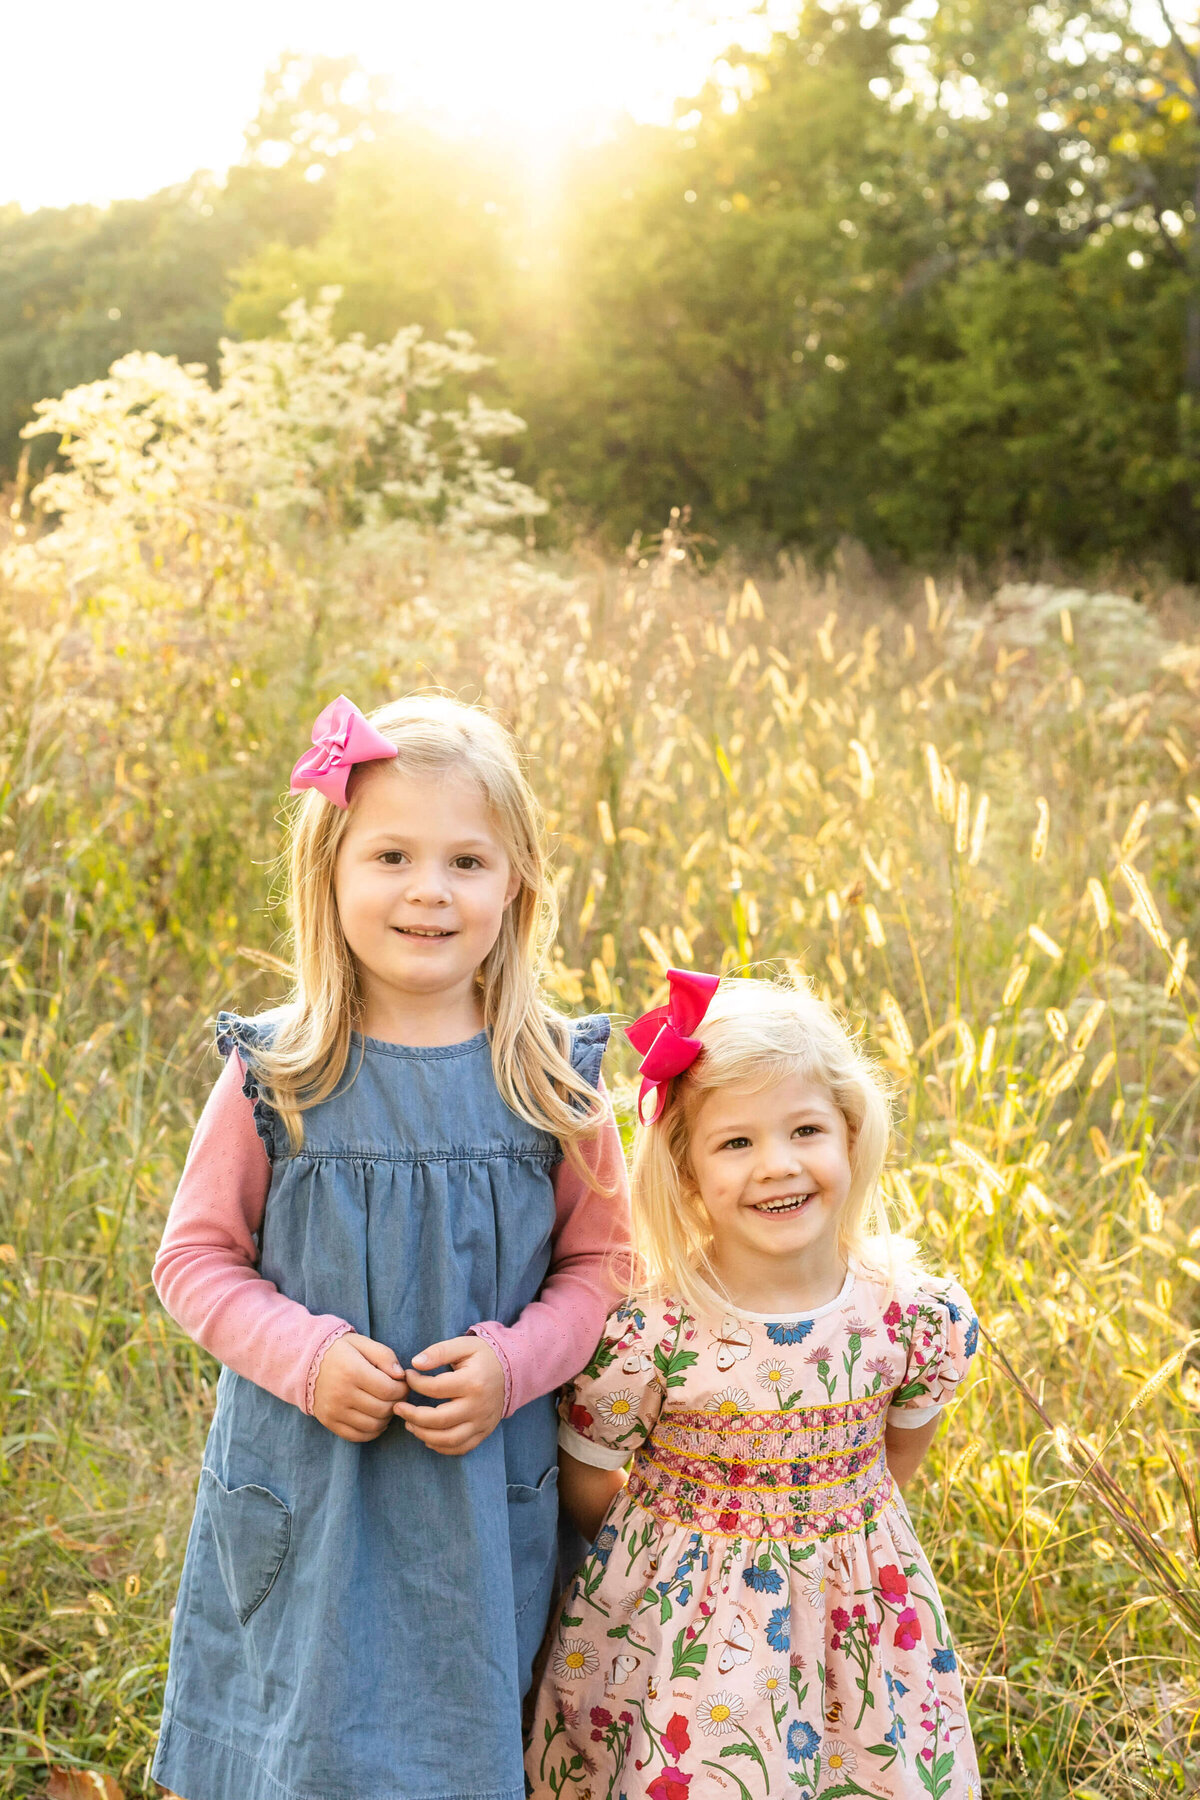 2 young sisters smiling at the camera in a field of tall grass during sunset